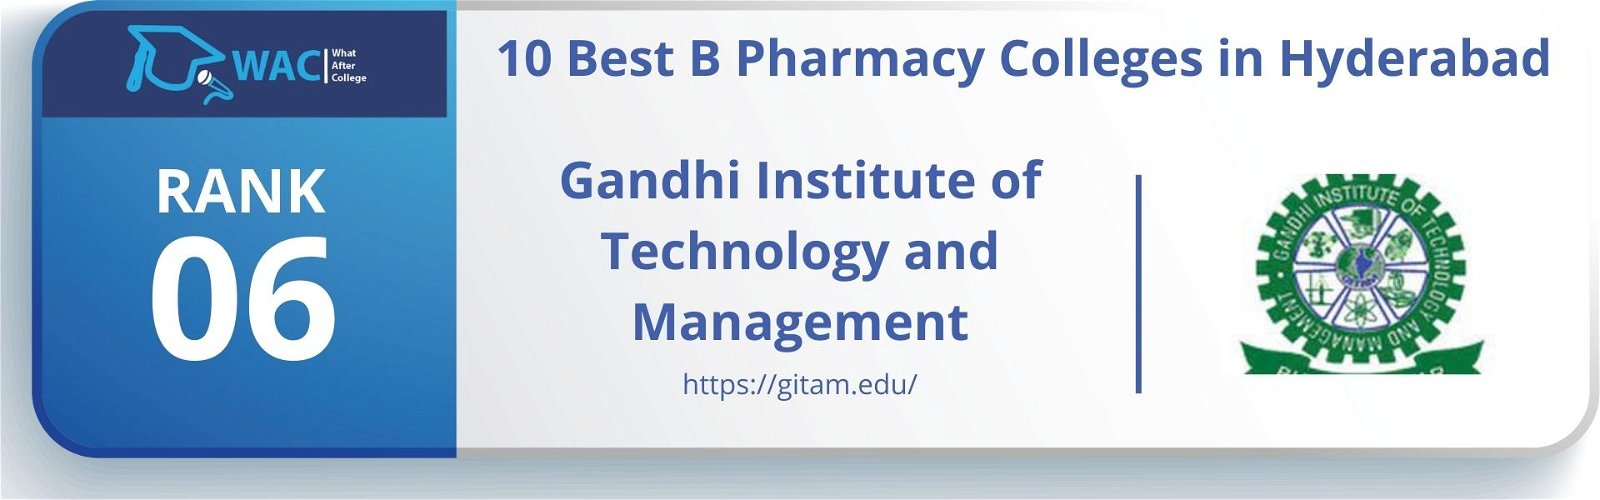 B Pharmacy Colleges in Hyderabad